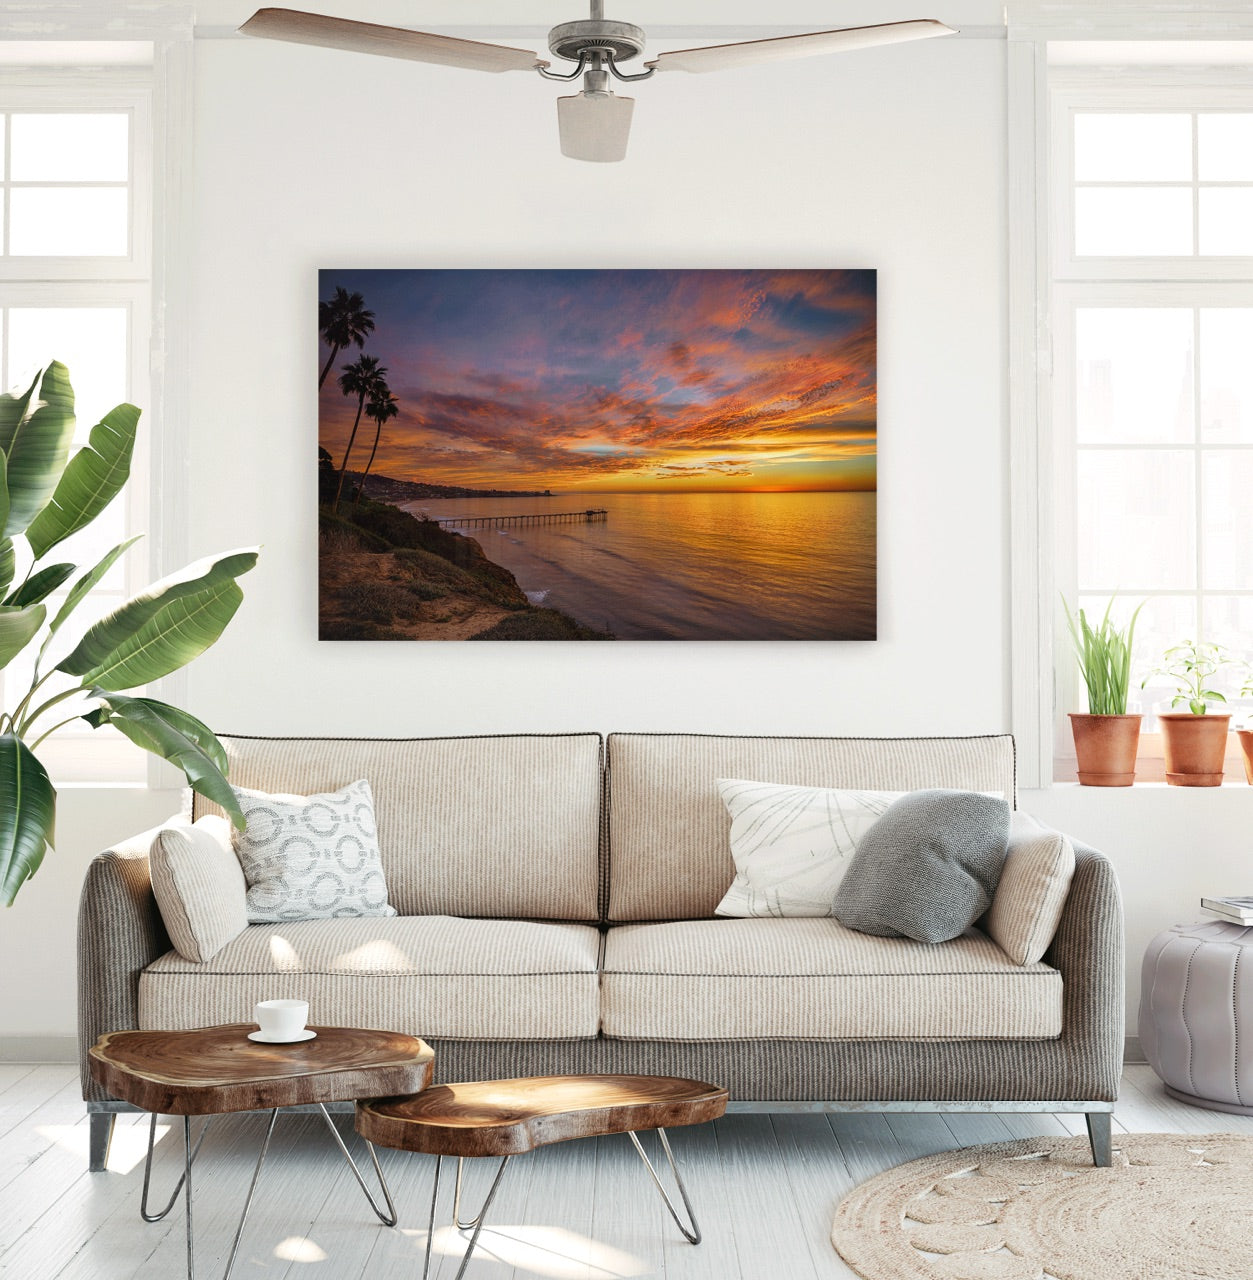 "Above the Jewel" Sunset Living Room Wall Art